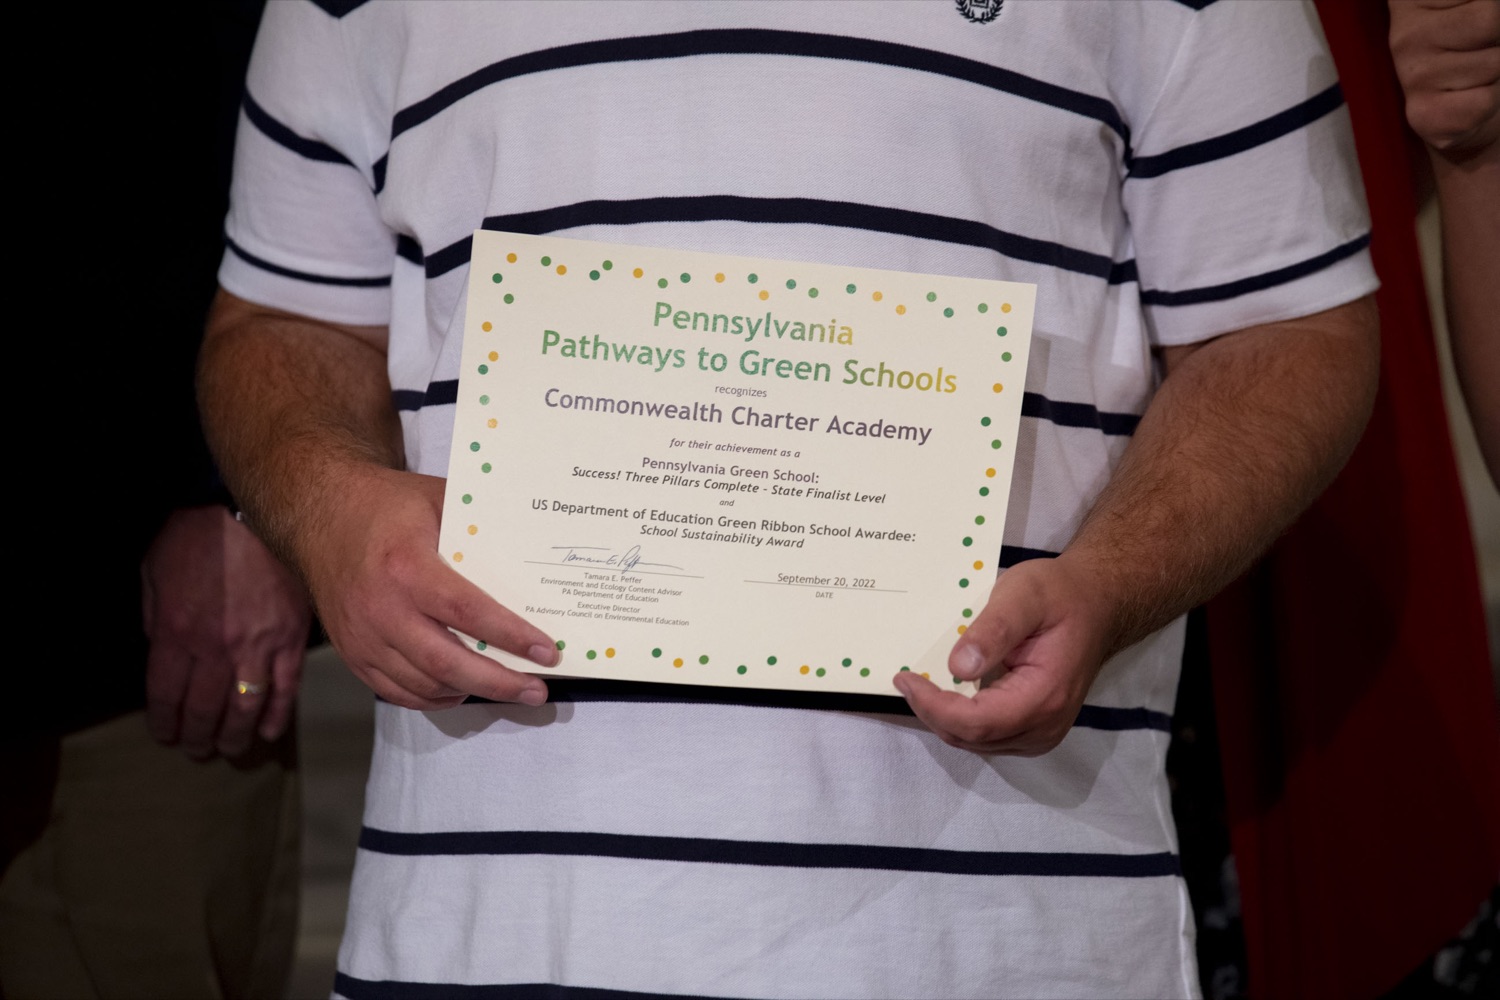 The Wolf Administration congratulates the 10 U.S. Department of Education Green Ribbon Schools (ED-GRS) being recognized for environmental sustainability efforts, in Harrisburg, PA on September 20, 2022.<br><a href="https://filesource.amperwave.net/commonwealthofpa/photo/22151_dcnr_pathways_cz_11.jpg" target="_blank">⇣ Download Photo</a>